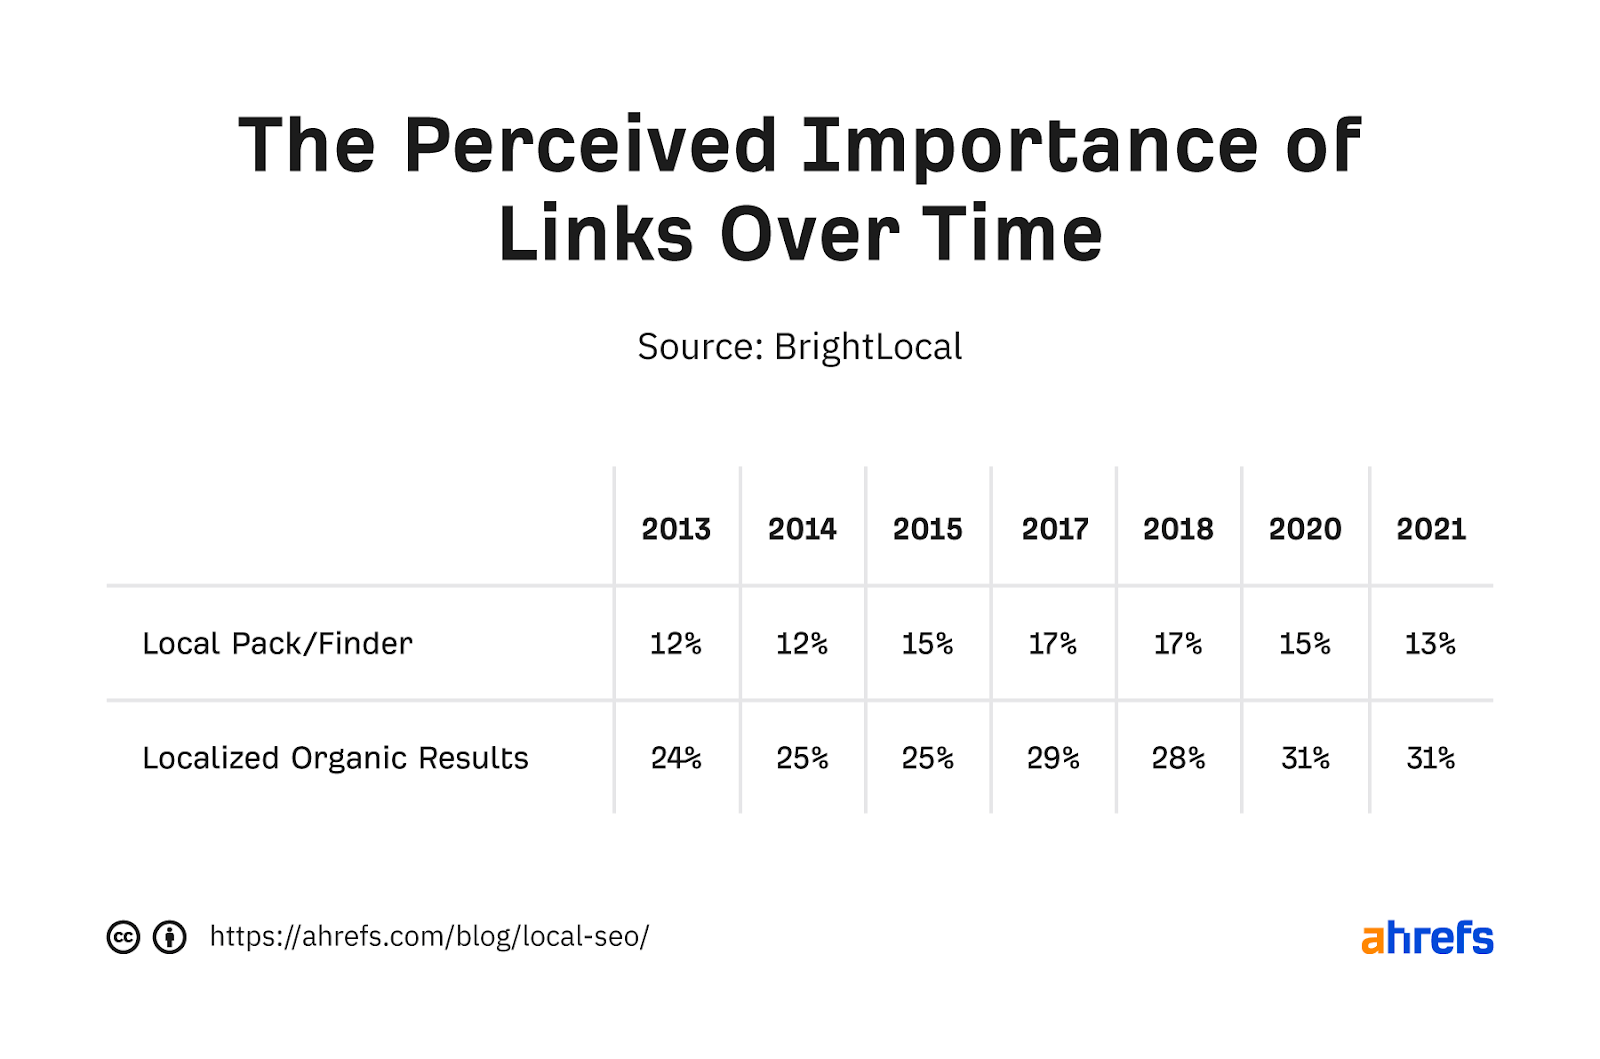 Table showing perceived importance of links over time for map pack and "regular" results, respectively